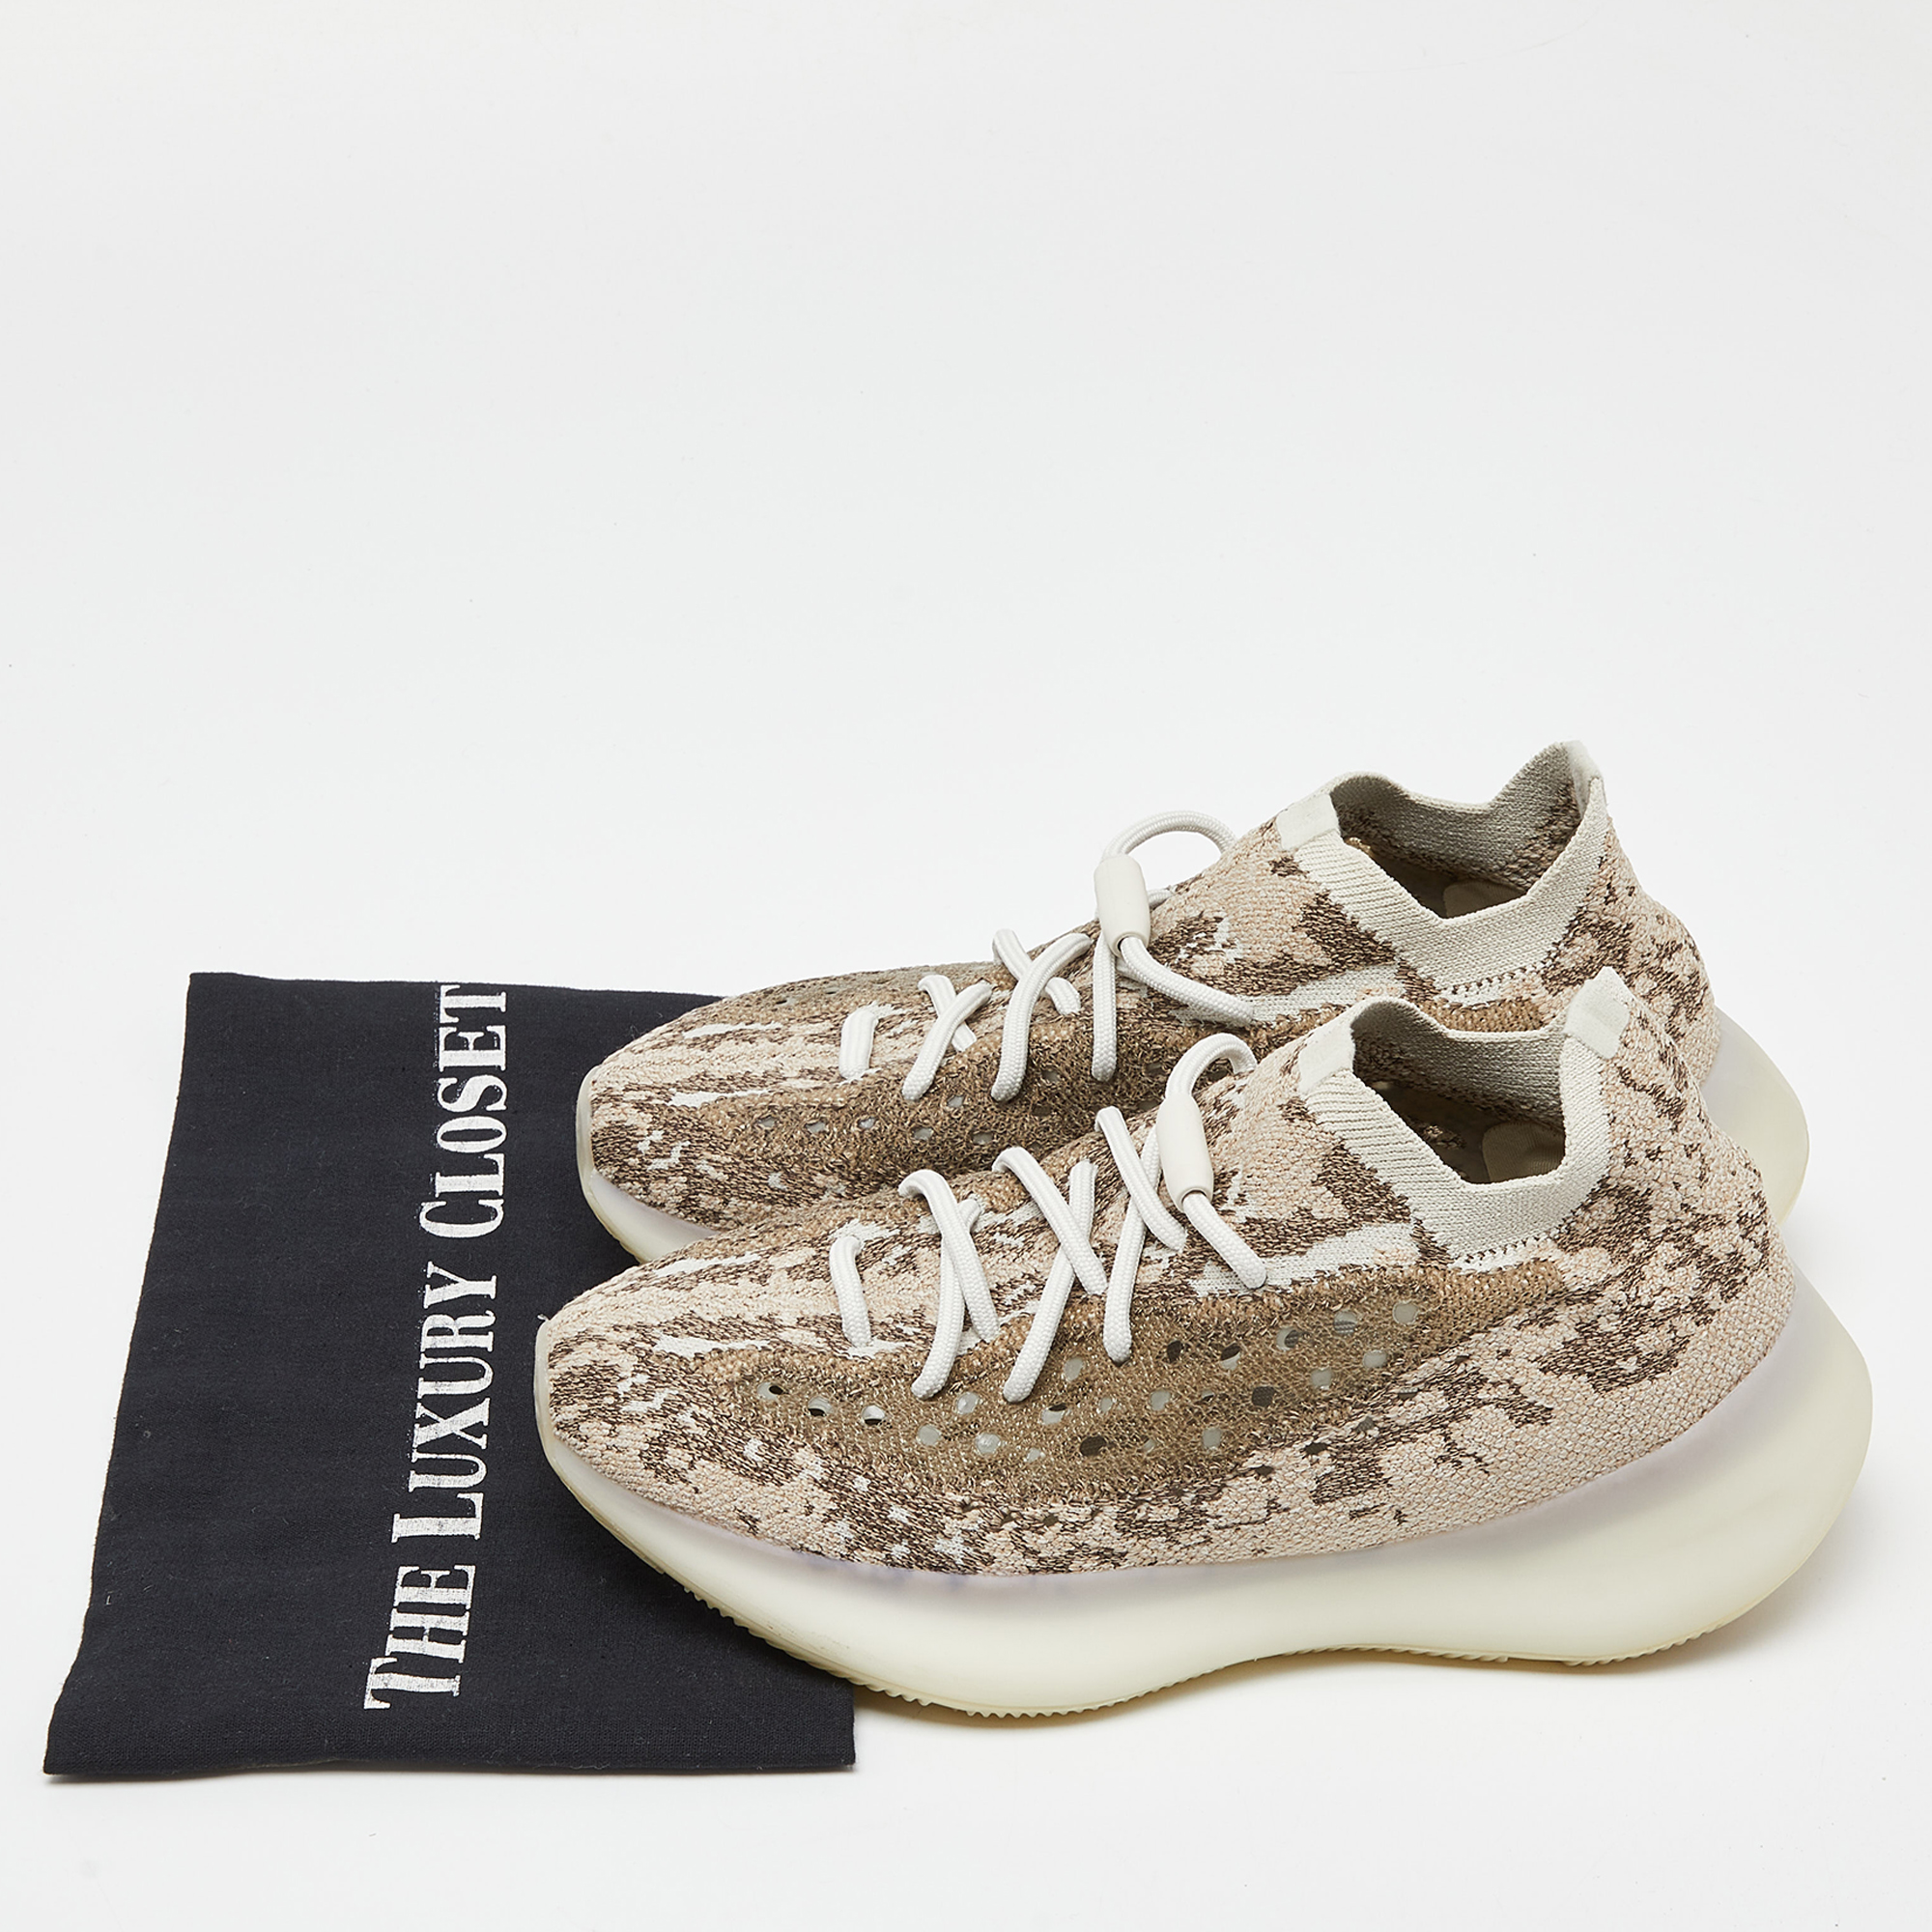 Yeezy X Adidas Brown Knit Fabric Boost 380 Pyrite Sneakers Size 38 2/3